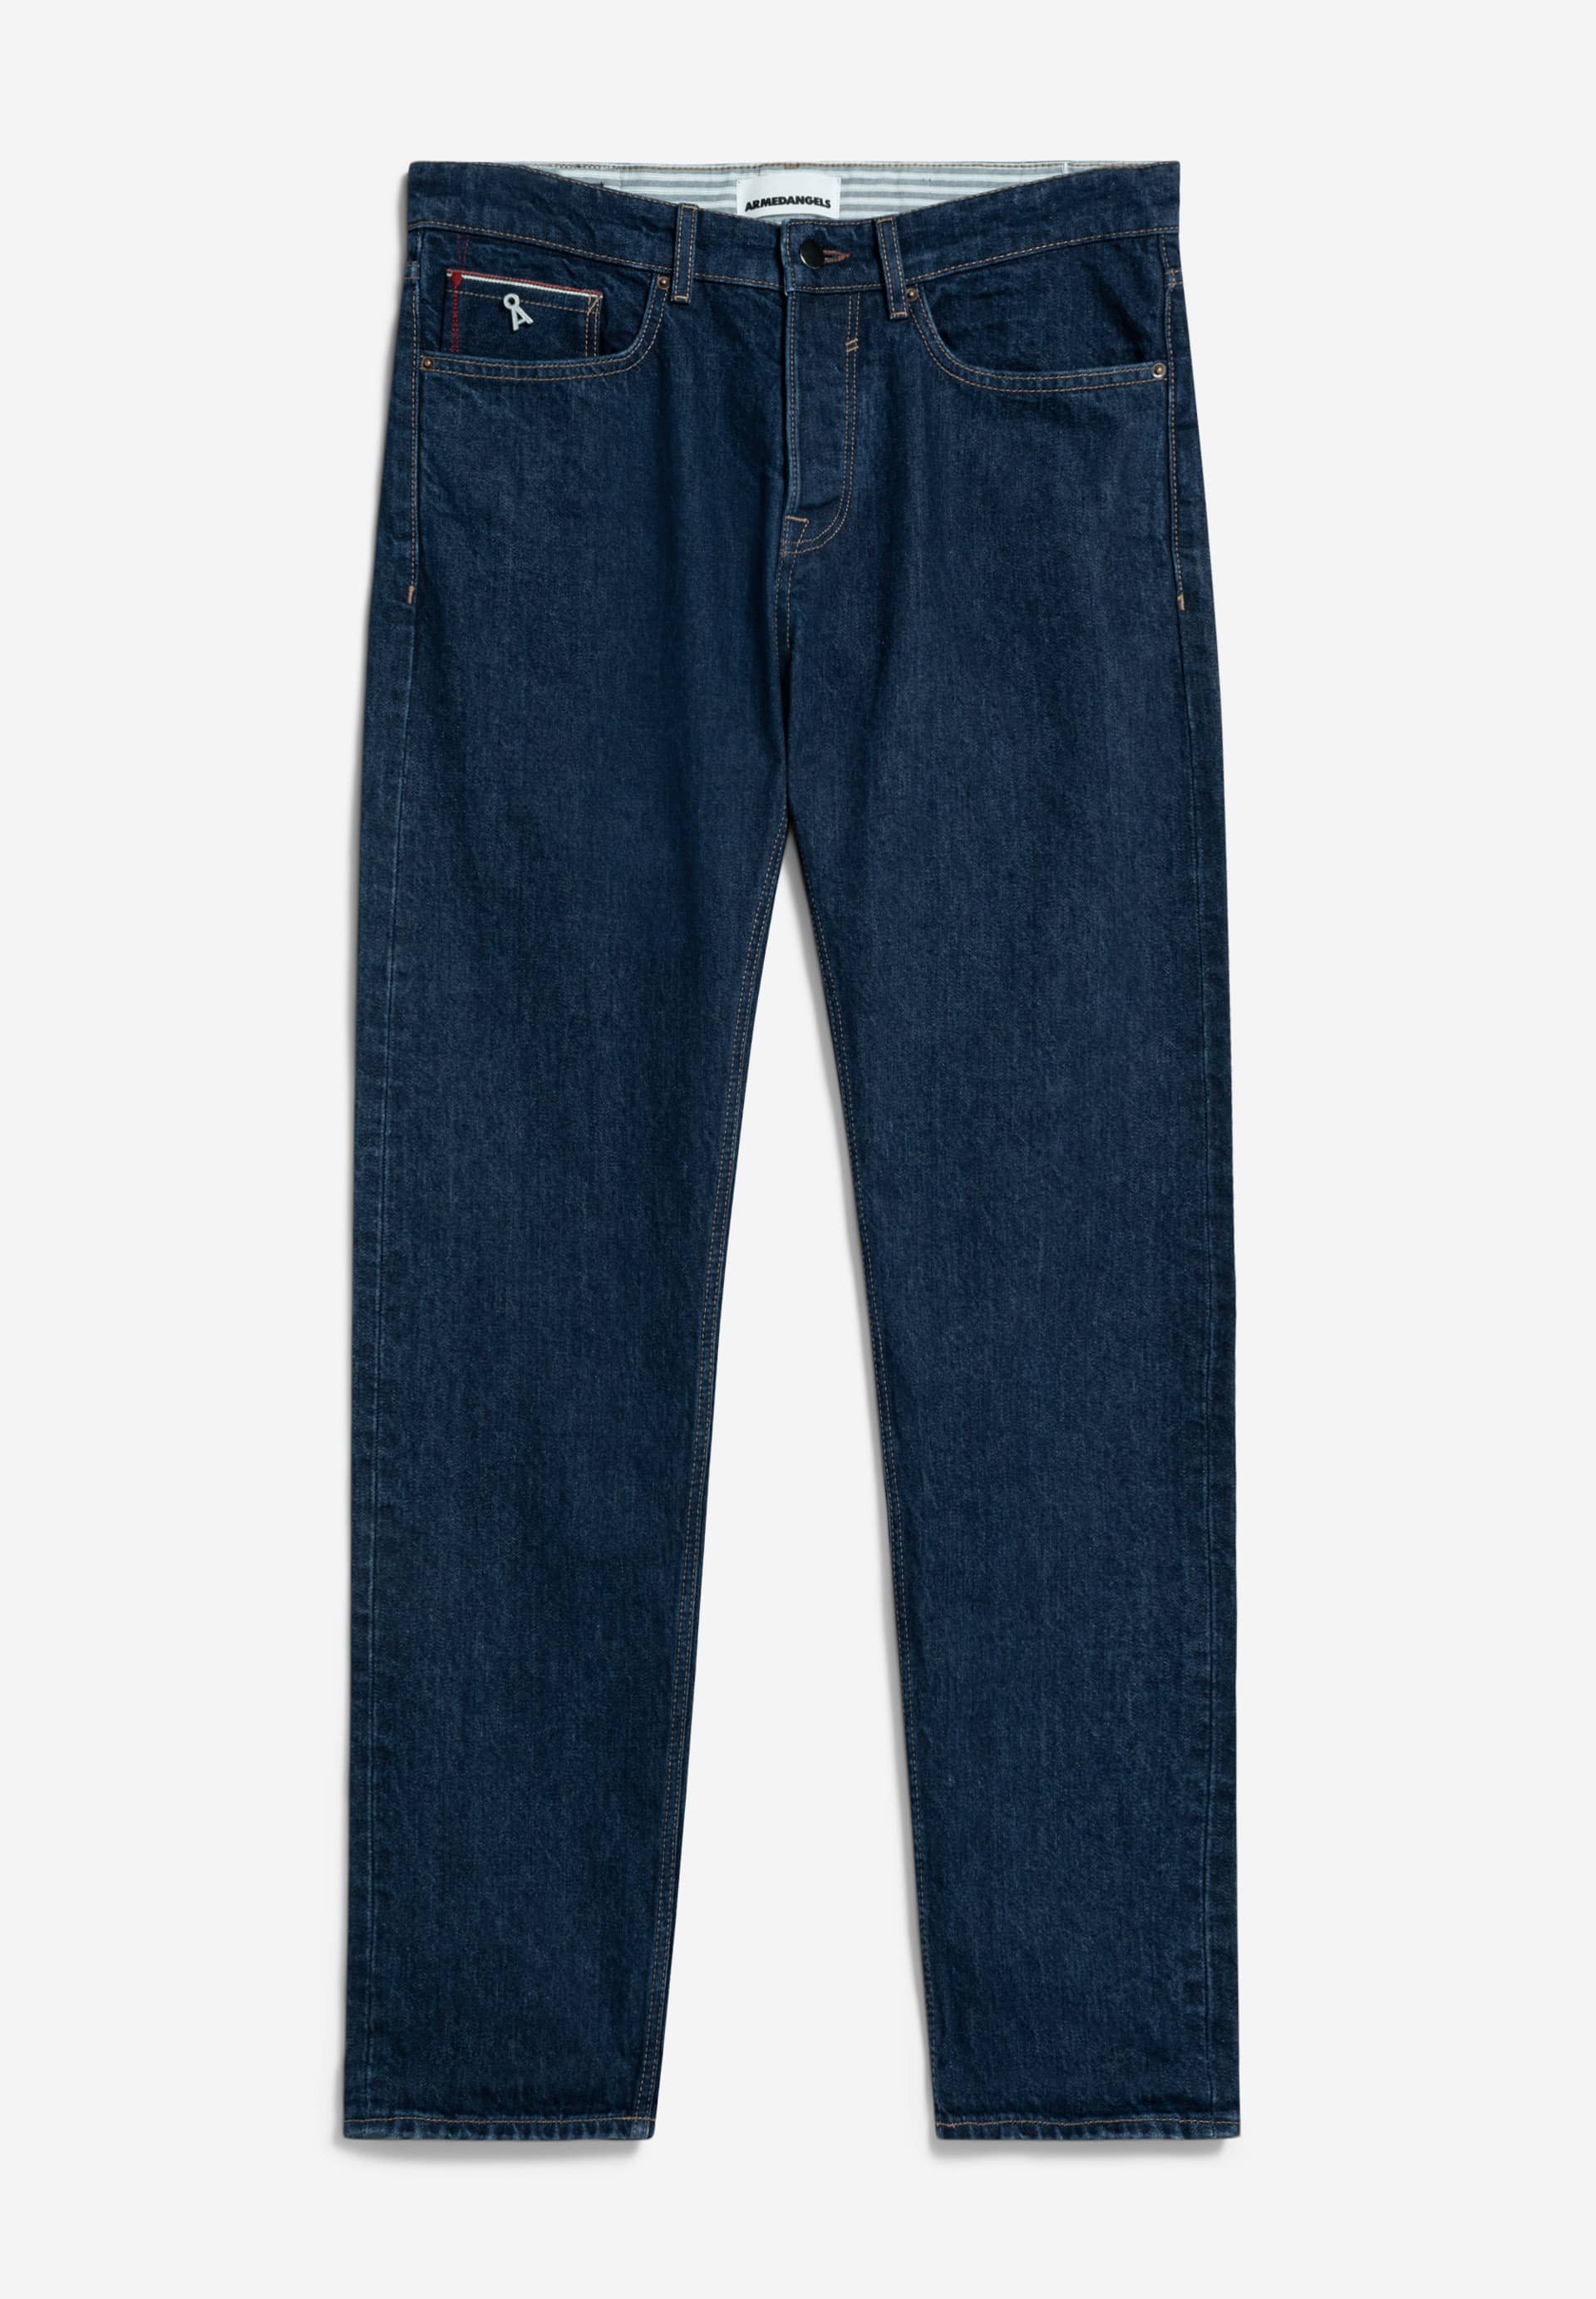 DYLAANO SELVEDGE Straight Fit Denim made of Organic Cotton Mix